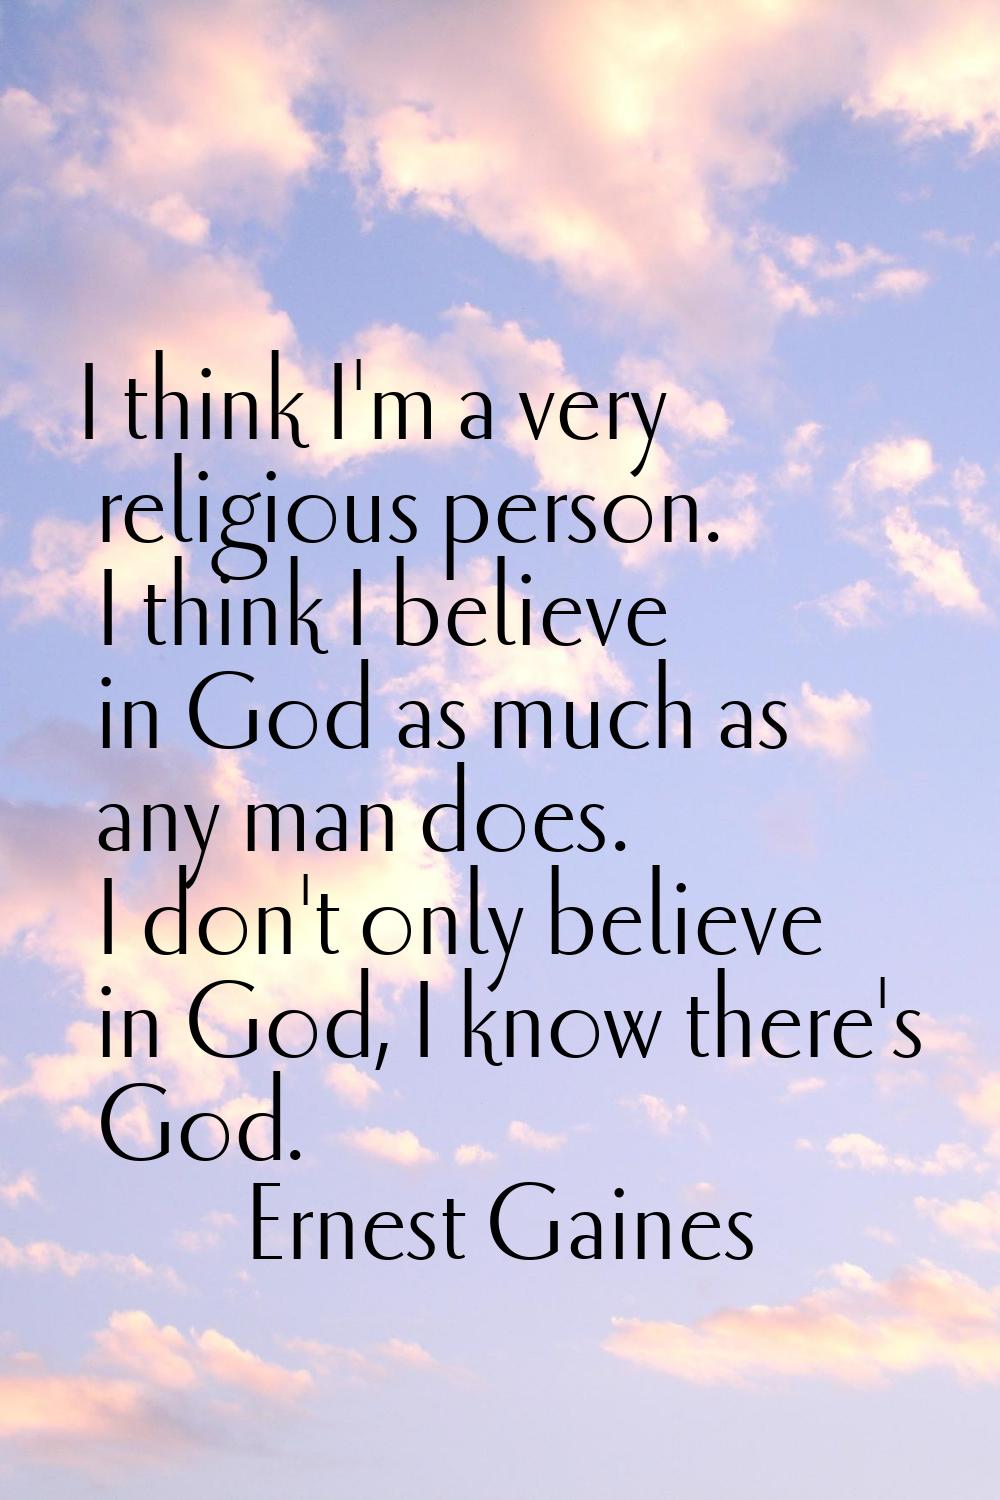 I think I'm a very religious person. I think I believe in God as much as any man does. I don't only